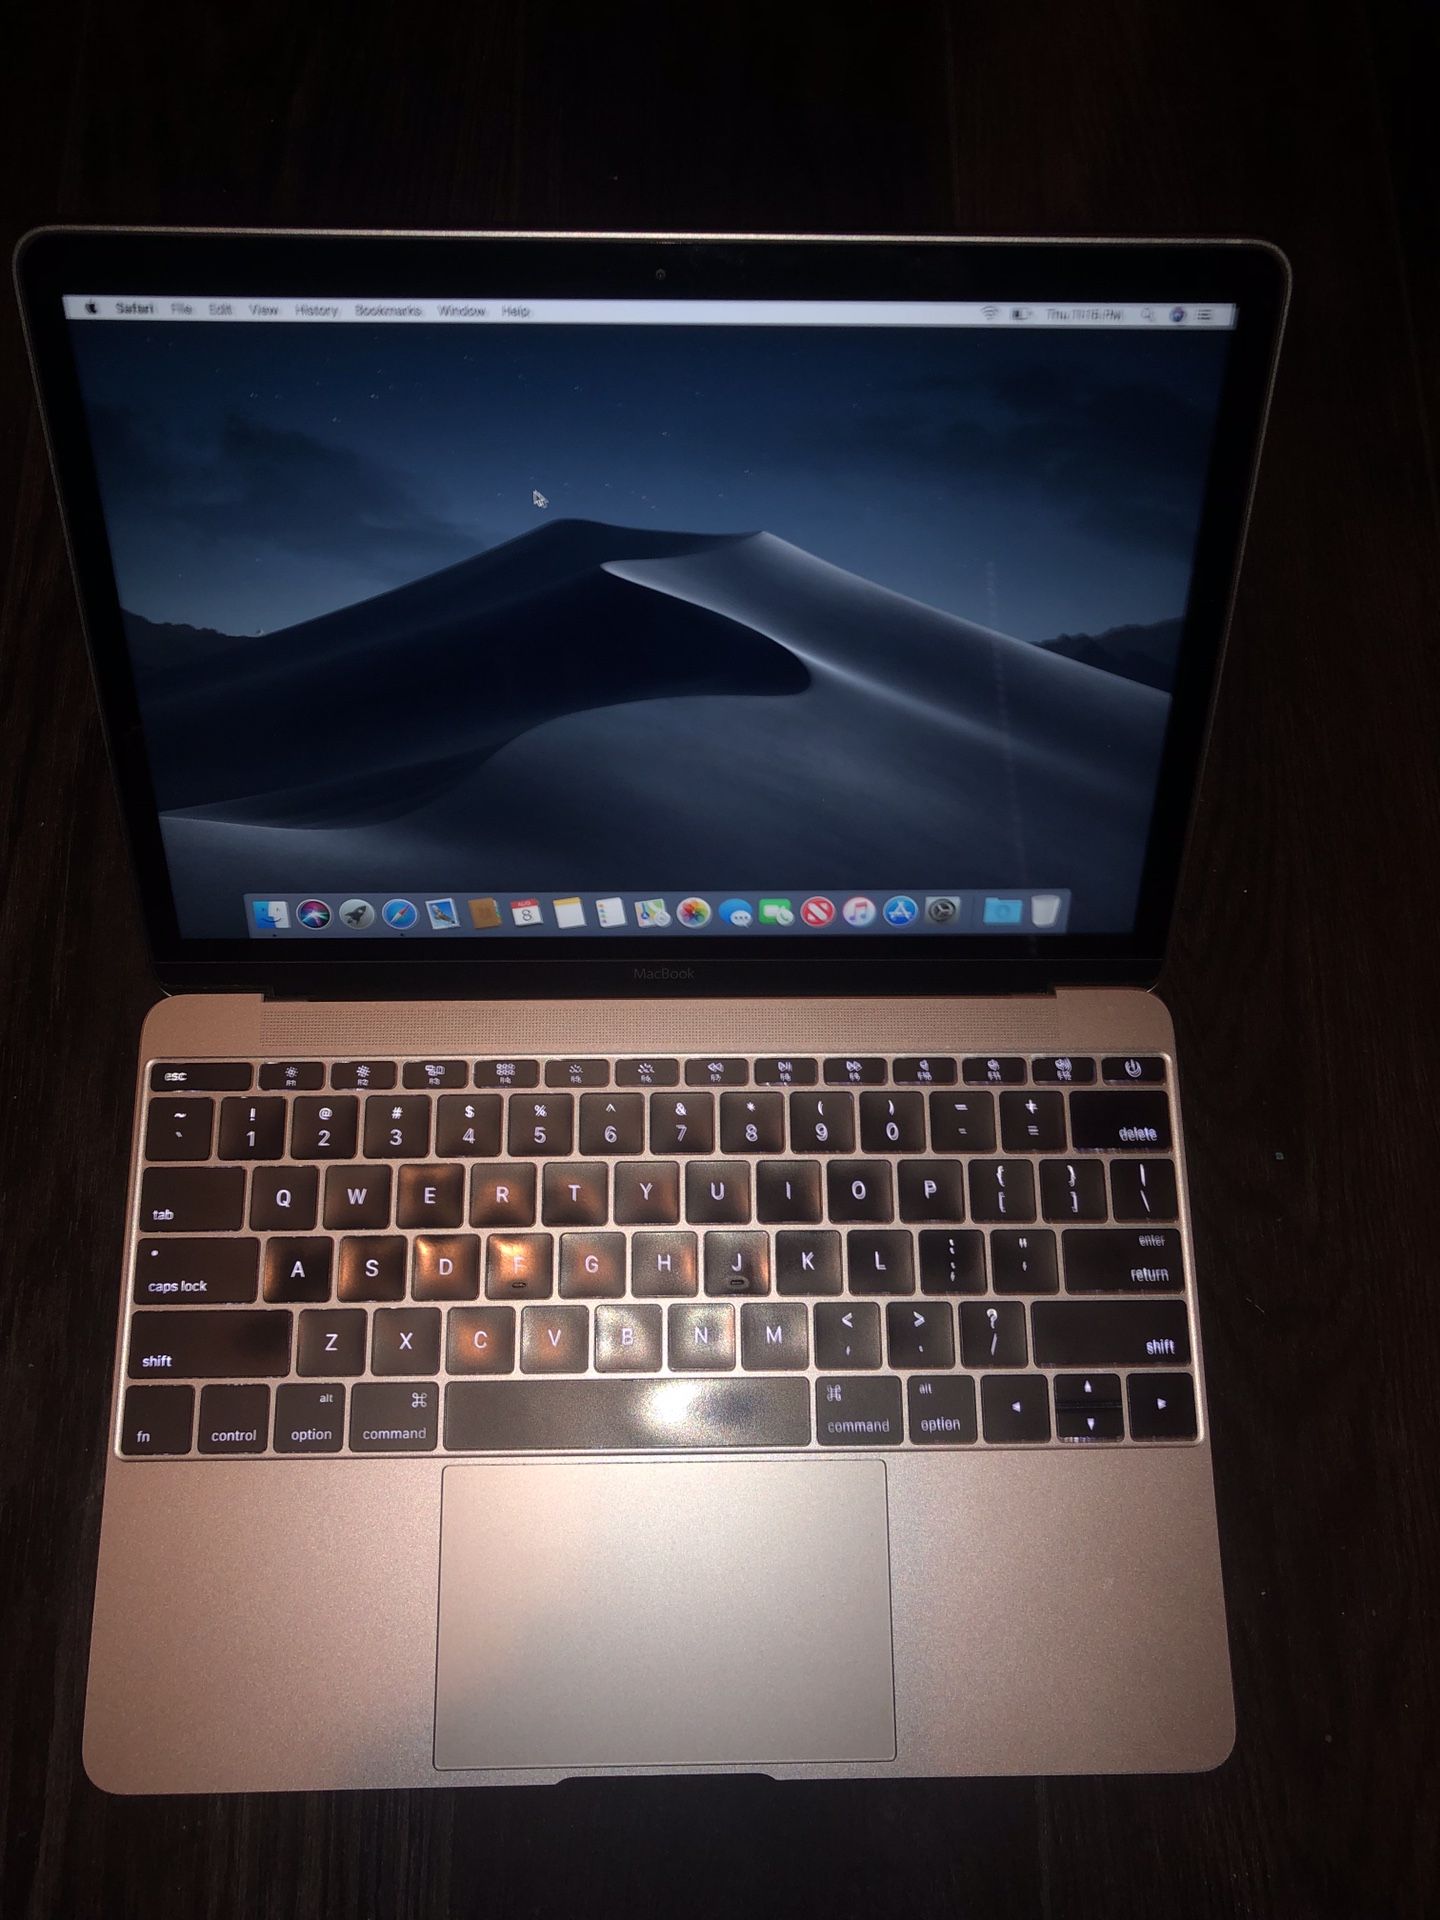 MacBook 2015 model 512 gb hard drive and 8 gb ram like new condition with charger